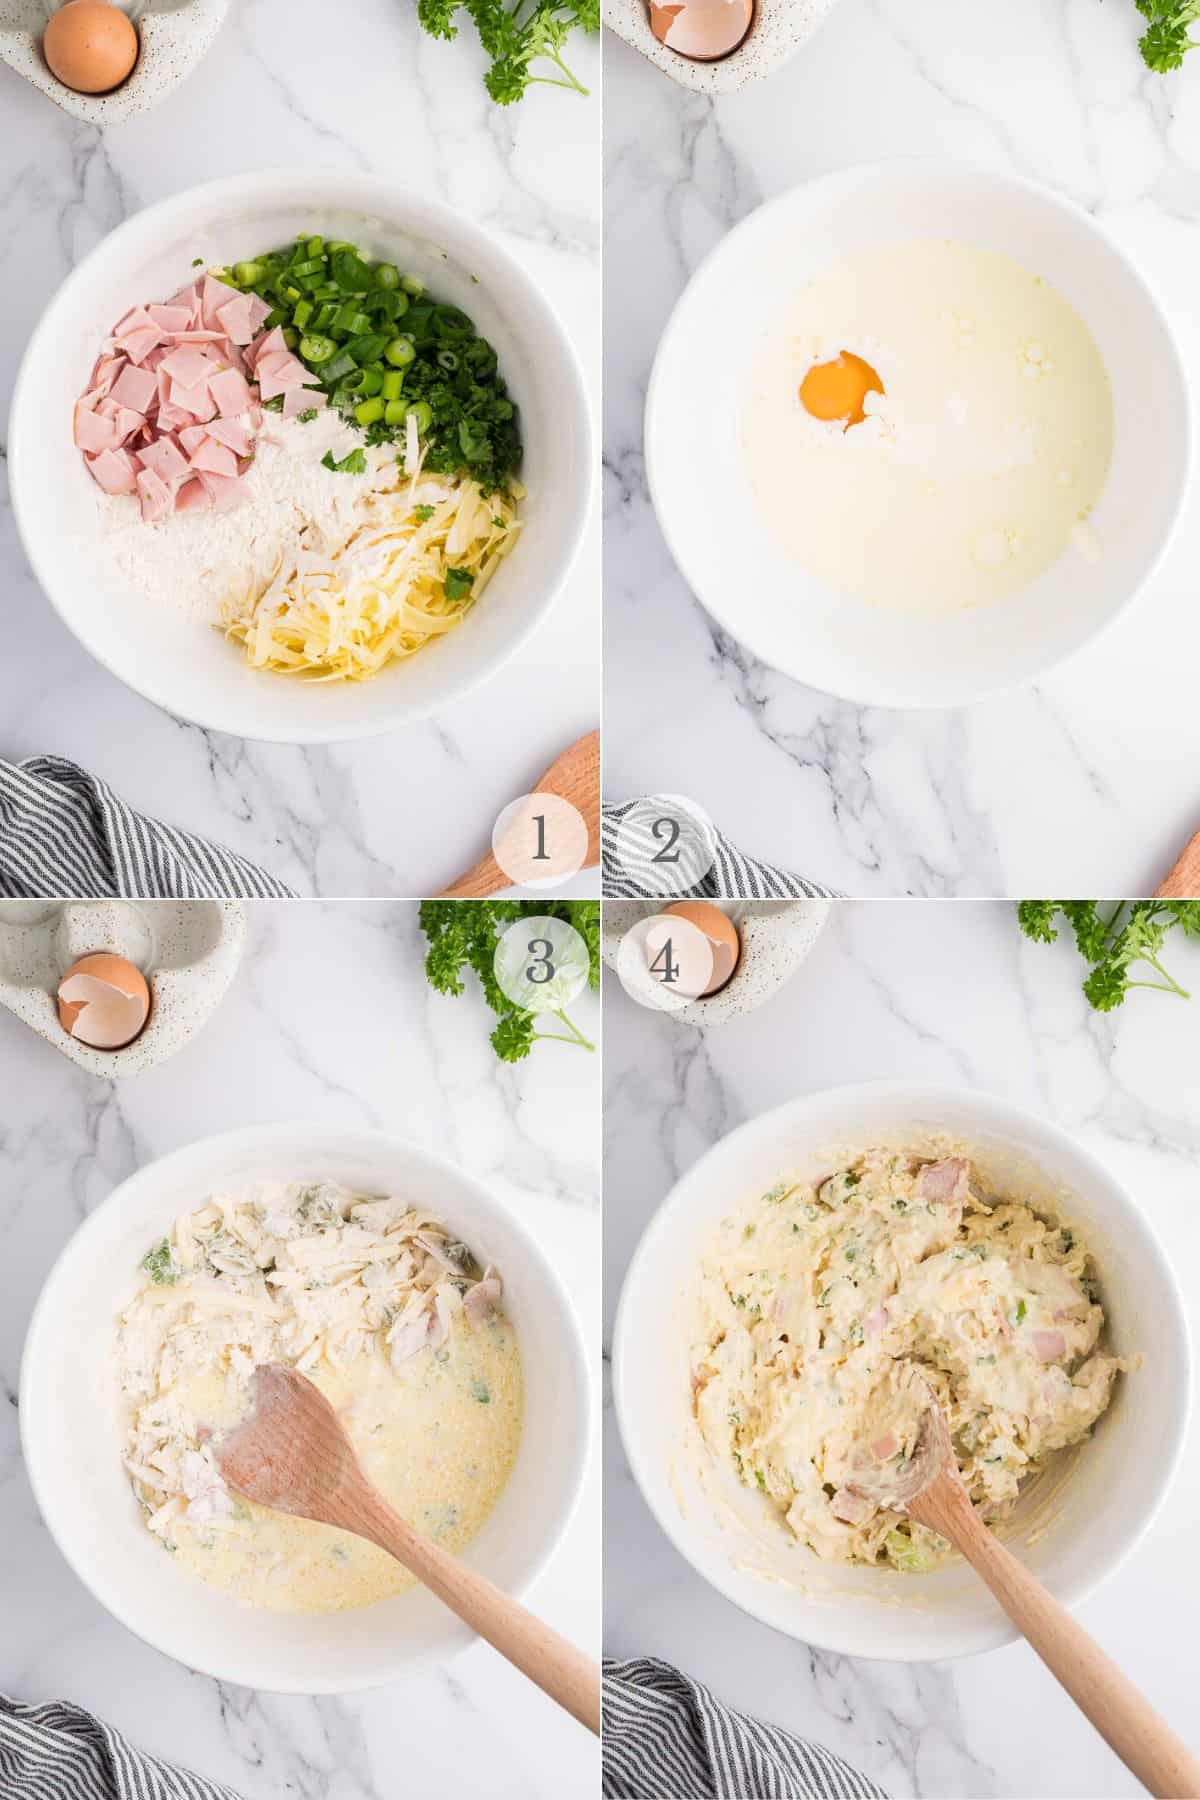 ham and cheese muffins recipe steps 1-4.